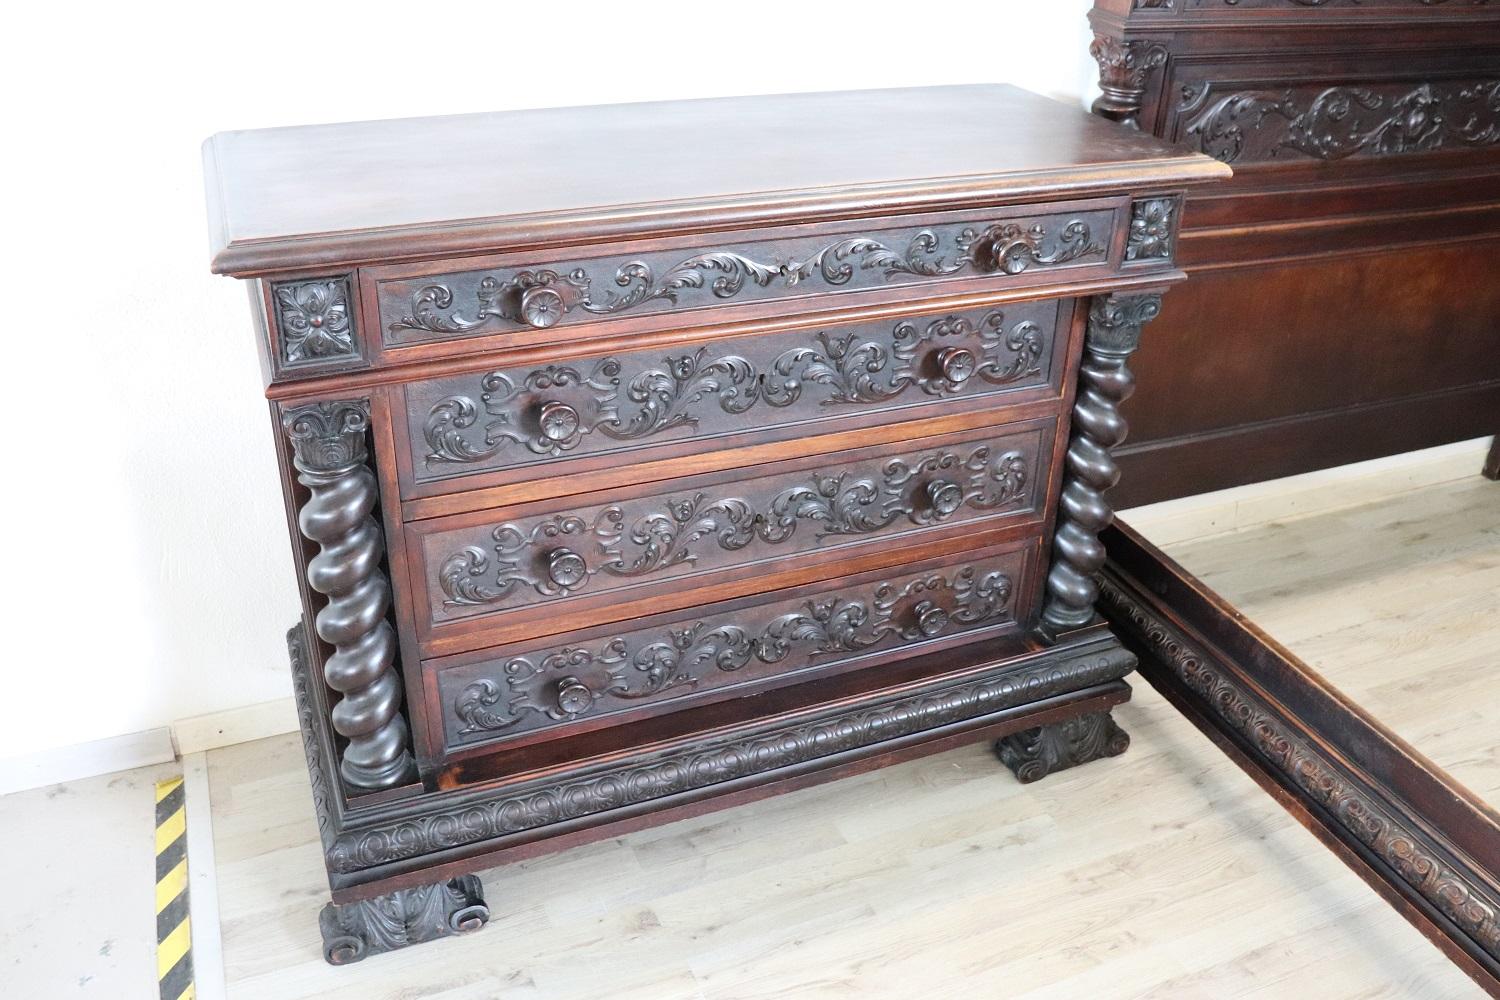 Majestic complete bedroom set in perfect Renaissance style 1880s with five pieces:
One large wardrobe
Two nightstands
One large chest of drawers
One double bed

Entirely made of walnut carved with great artistic quality. Large twisted columns